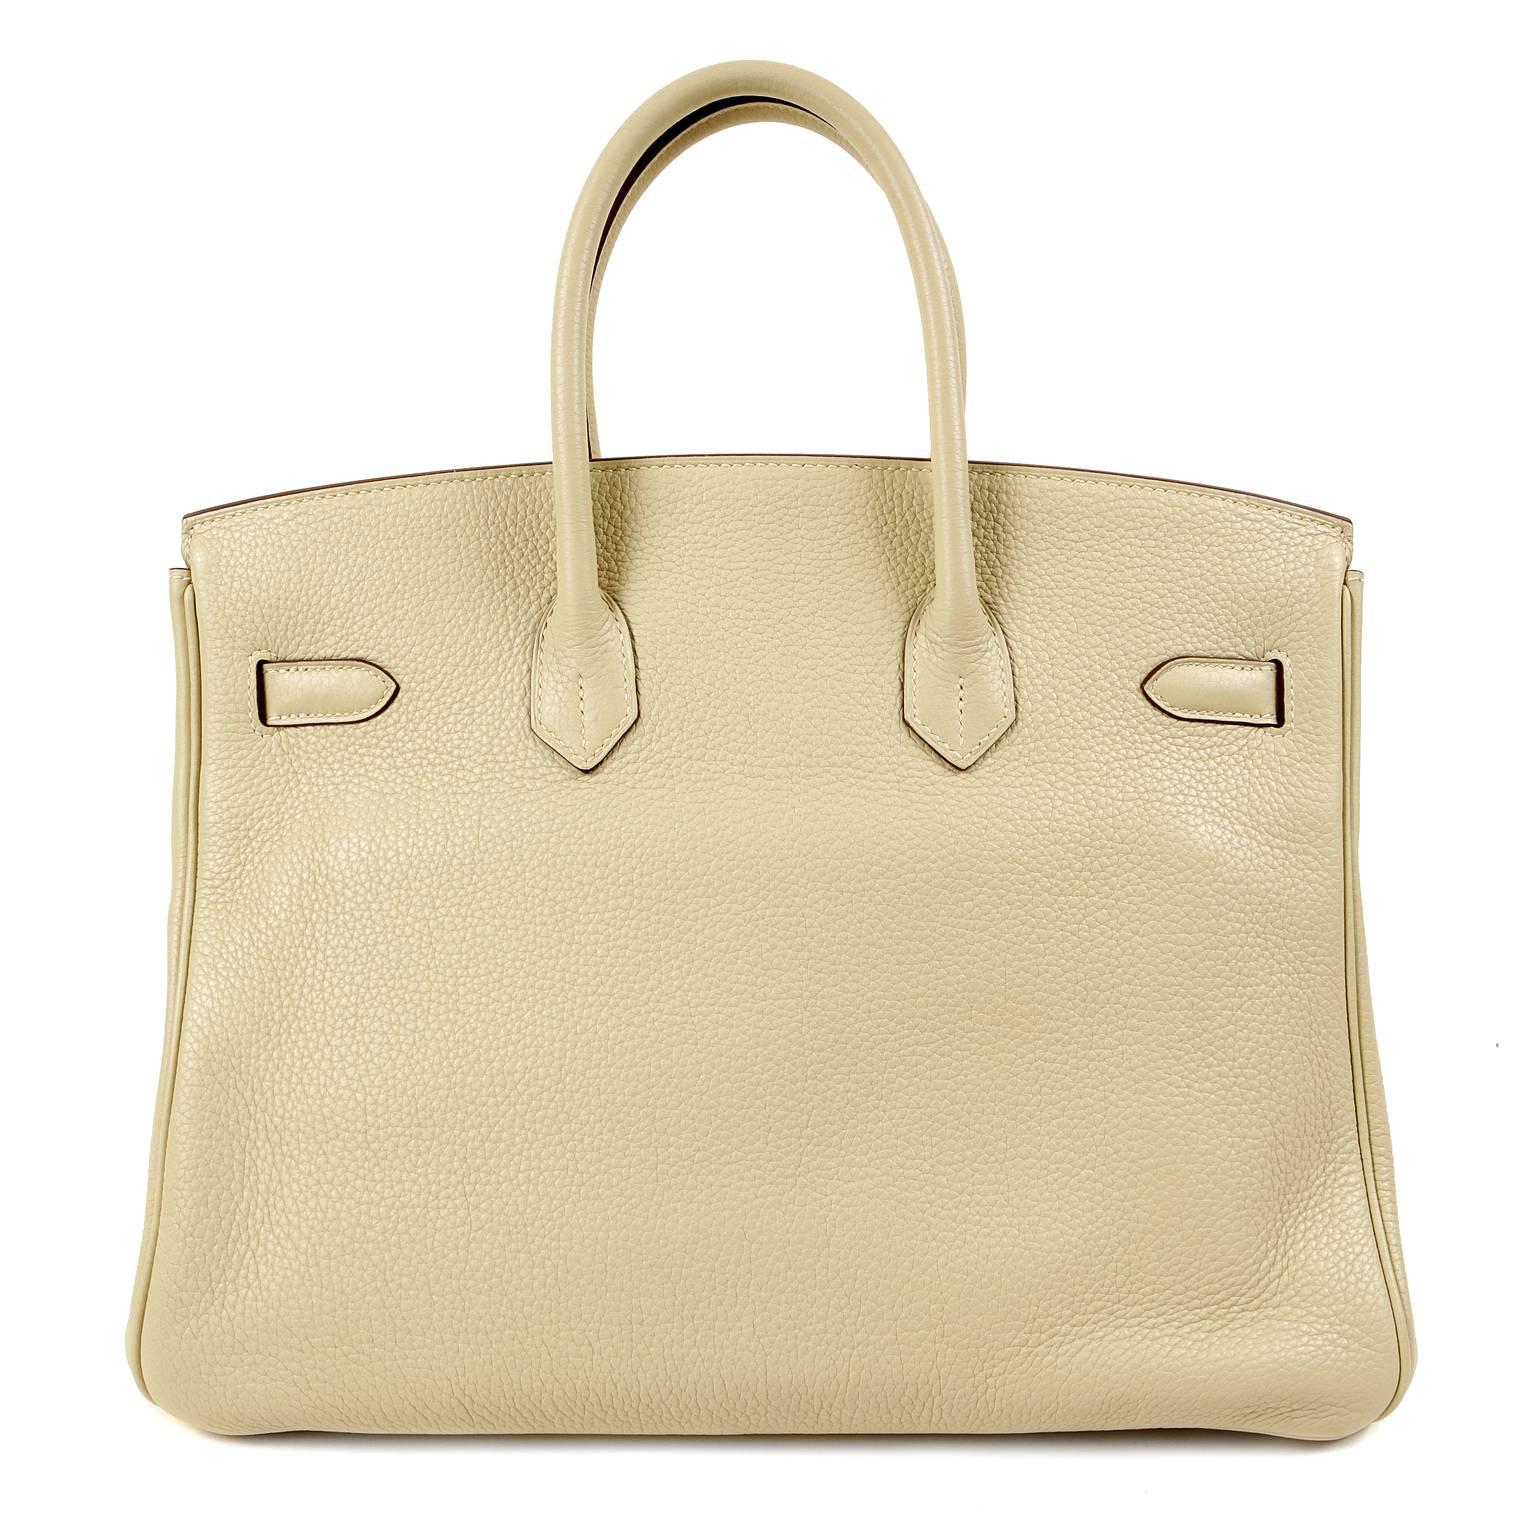 Hermès Parchemin Clemence Leather 35 cm Birkin is in pristine condition.   Hermès bags are considered the ultimate luxury item the world over.  Hand stitched by skilled craftsmen, wait lists of a year or more are commonplace.  This particular